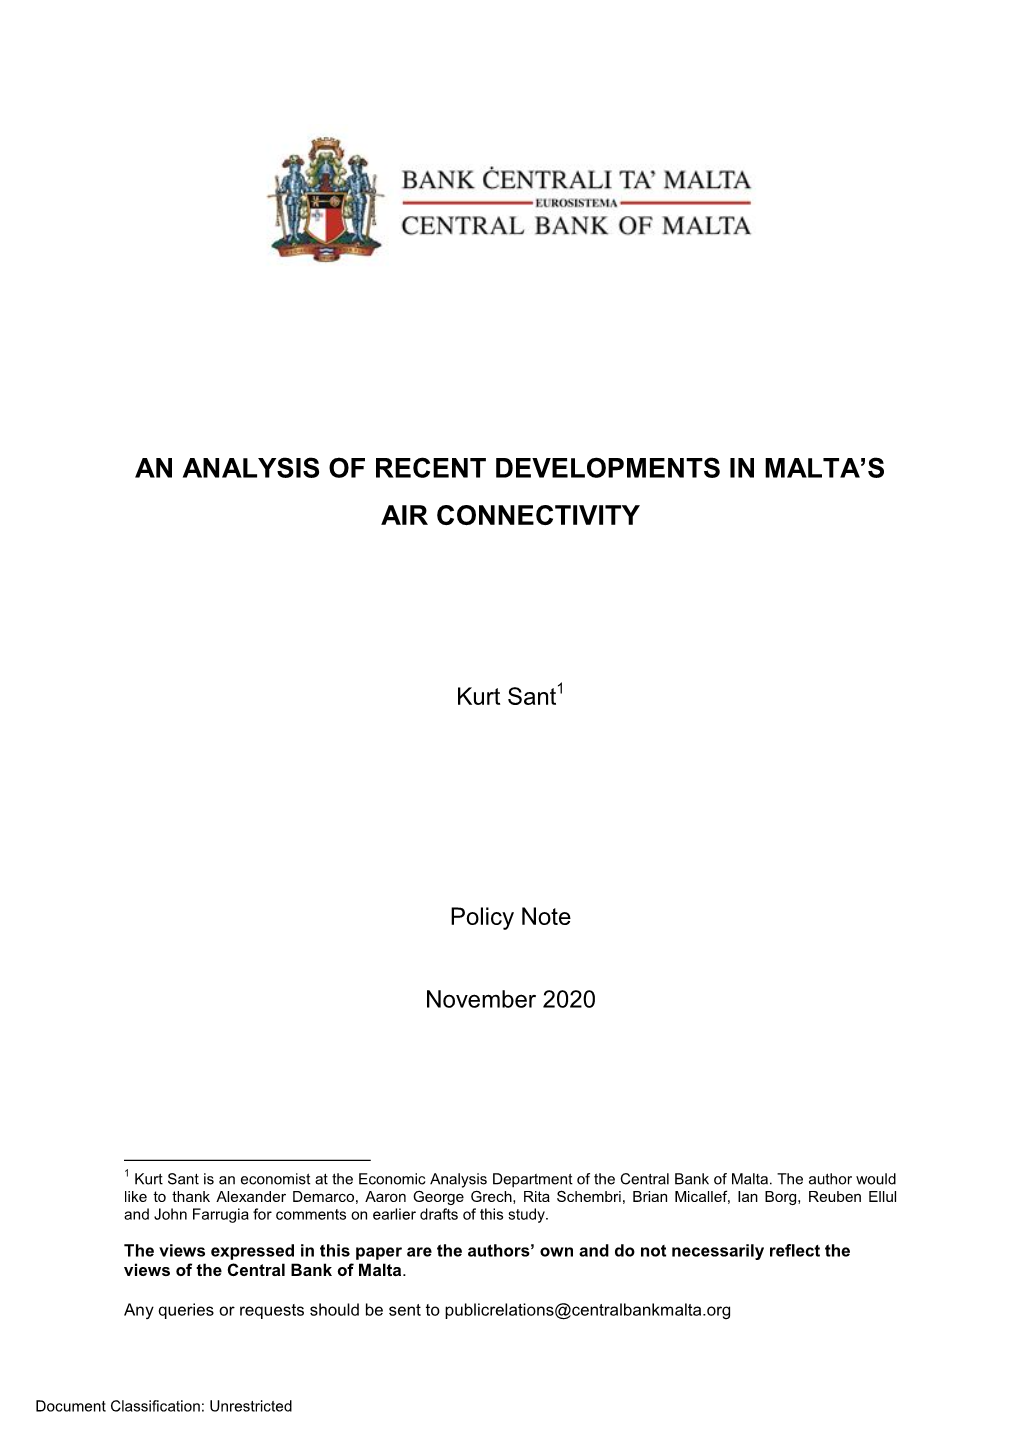 Policy-Note-Air-Connectivity.Pdf